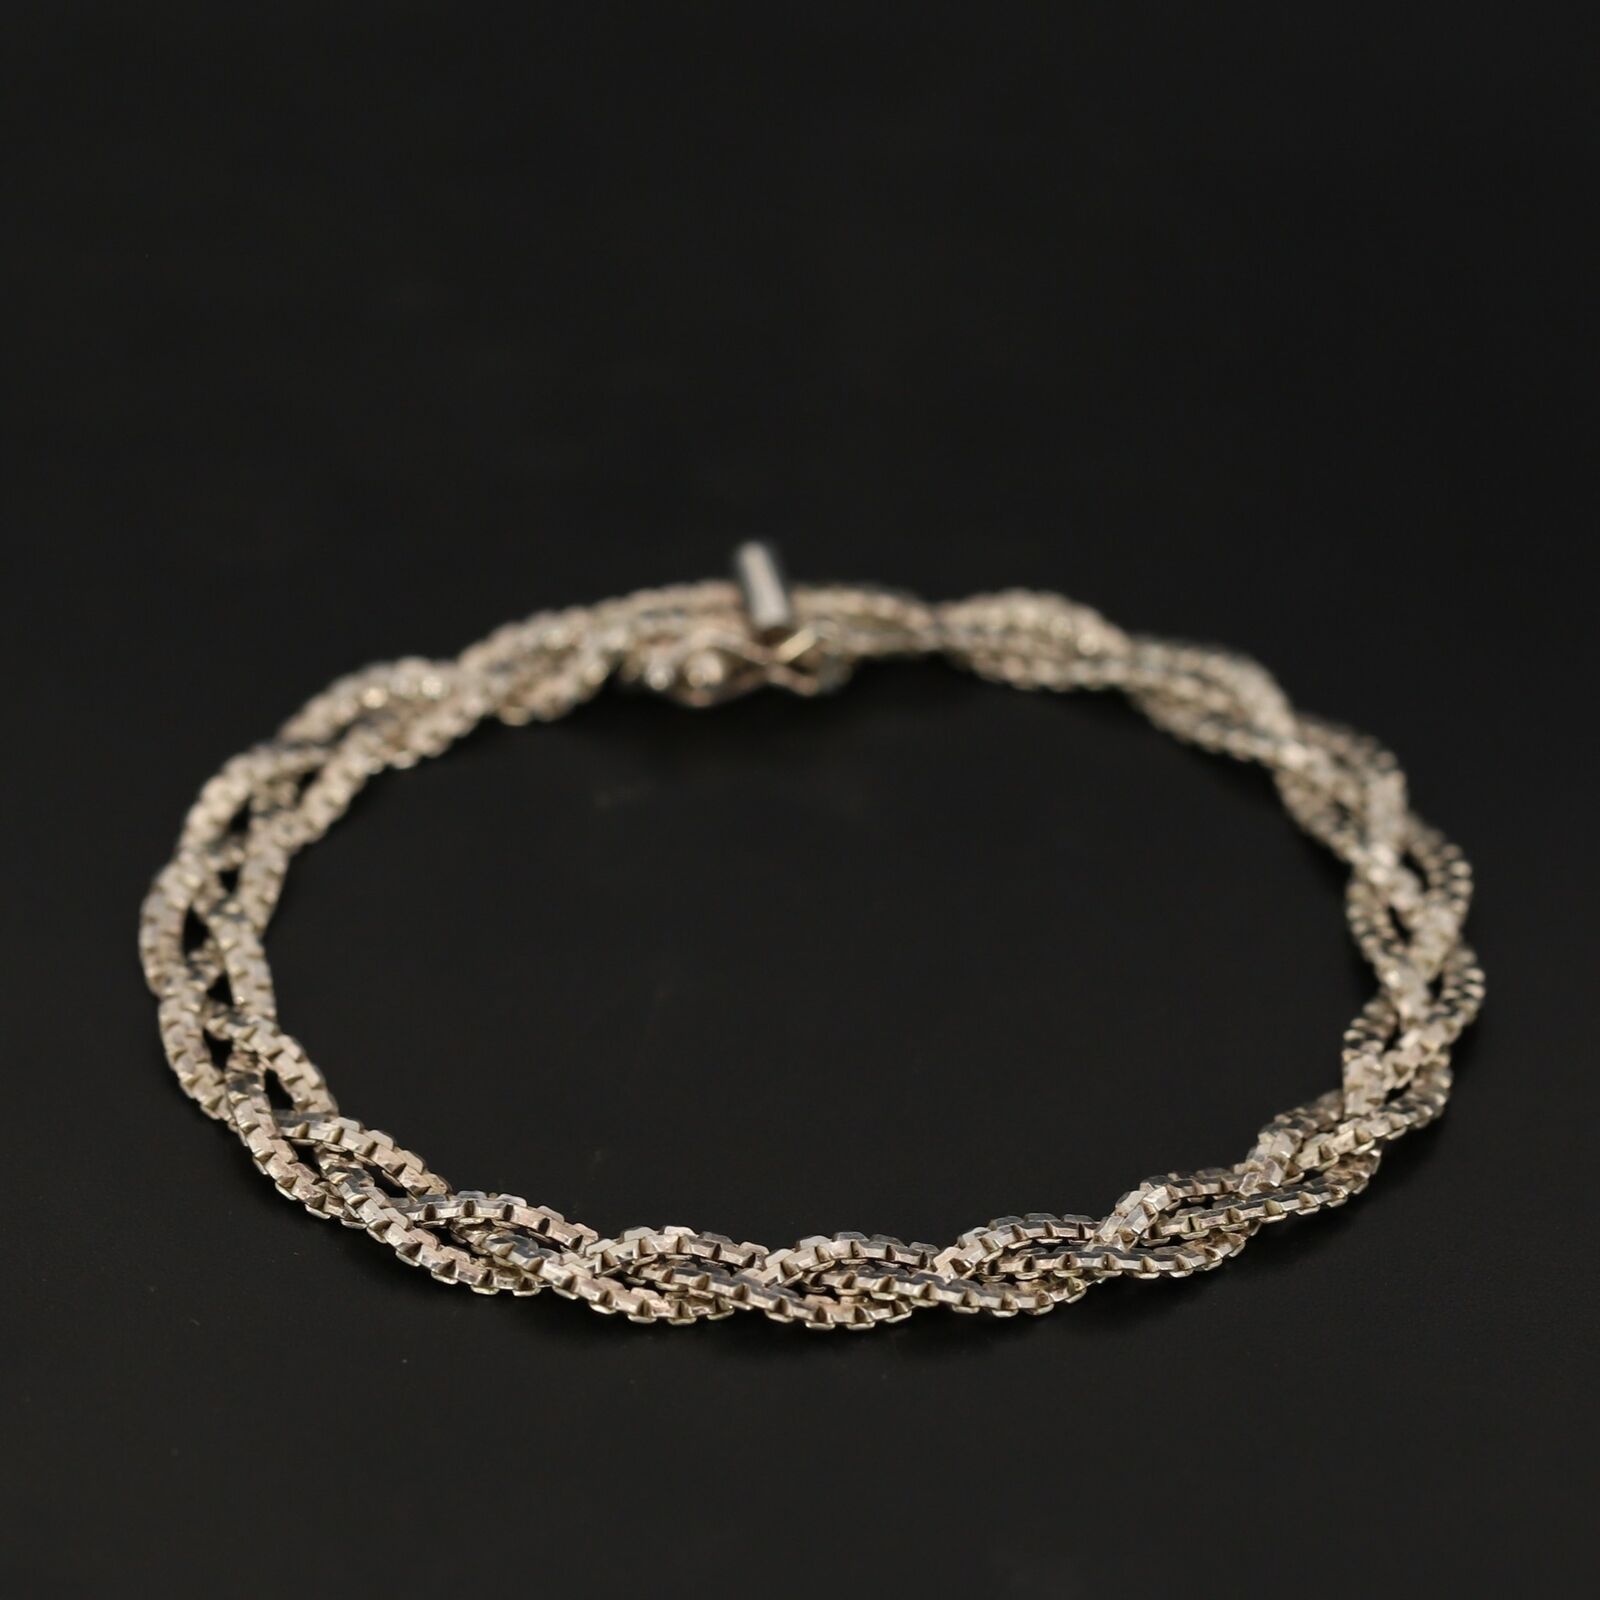 Sterling Silver - Italy 6mm Woven Flat Box Chain Link 7" Bracelet - 7g